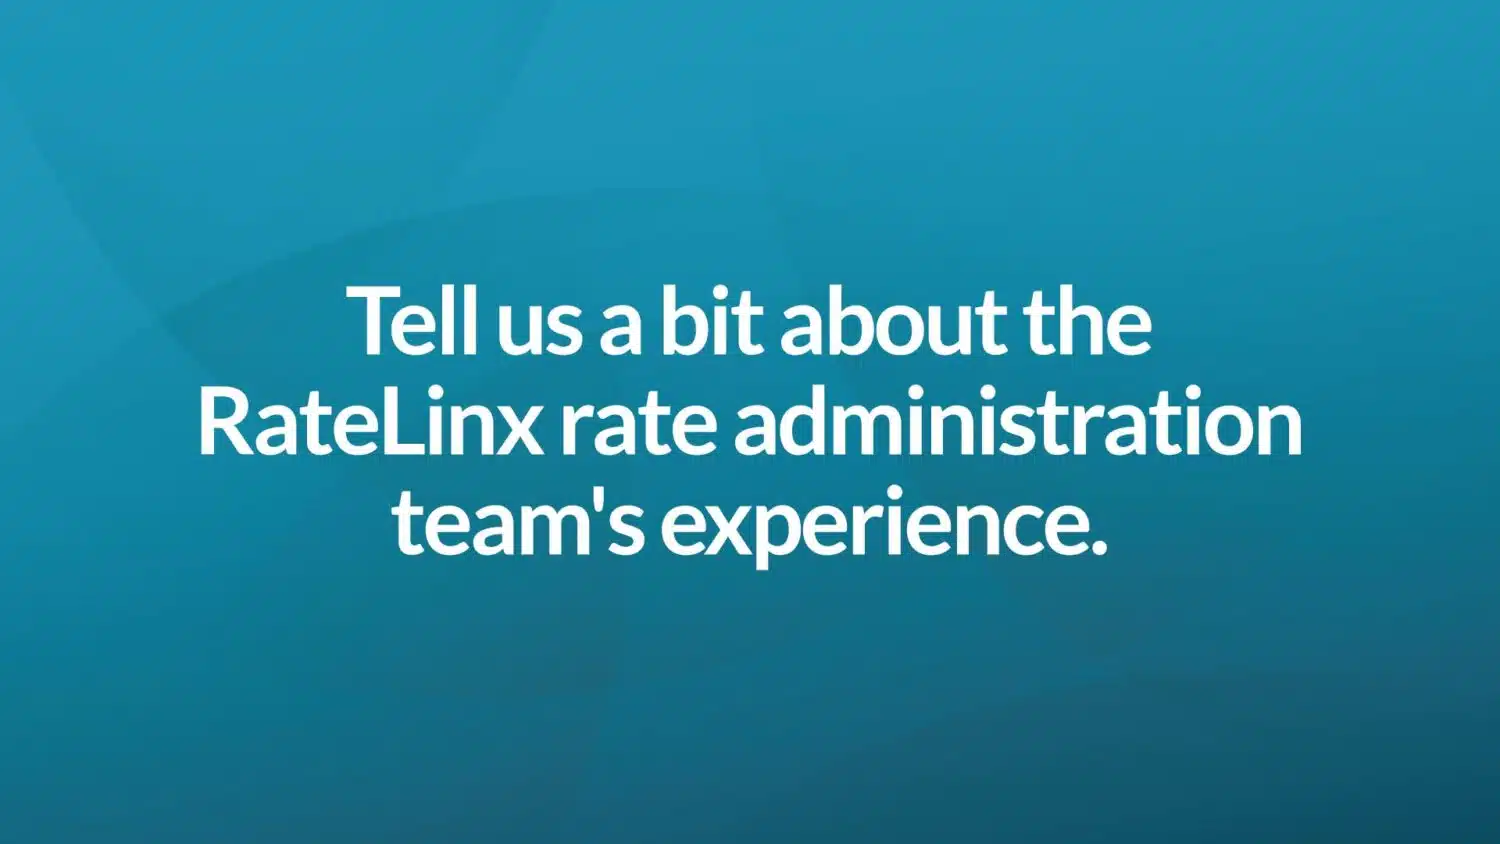 Tell us a bit about the RateLinx rate administration team's experience.